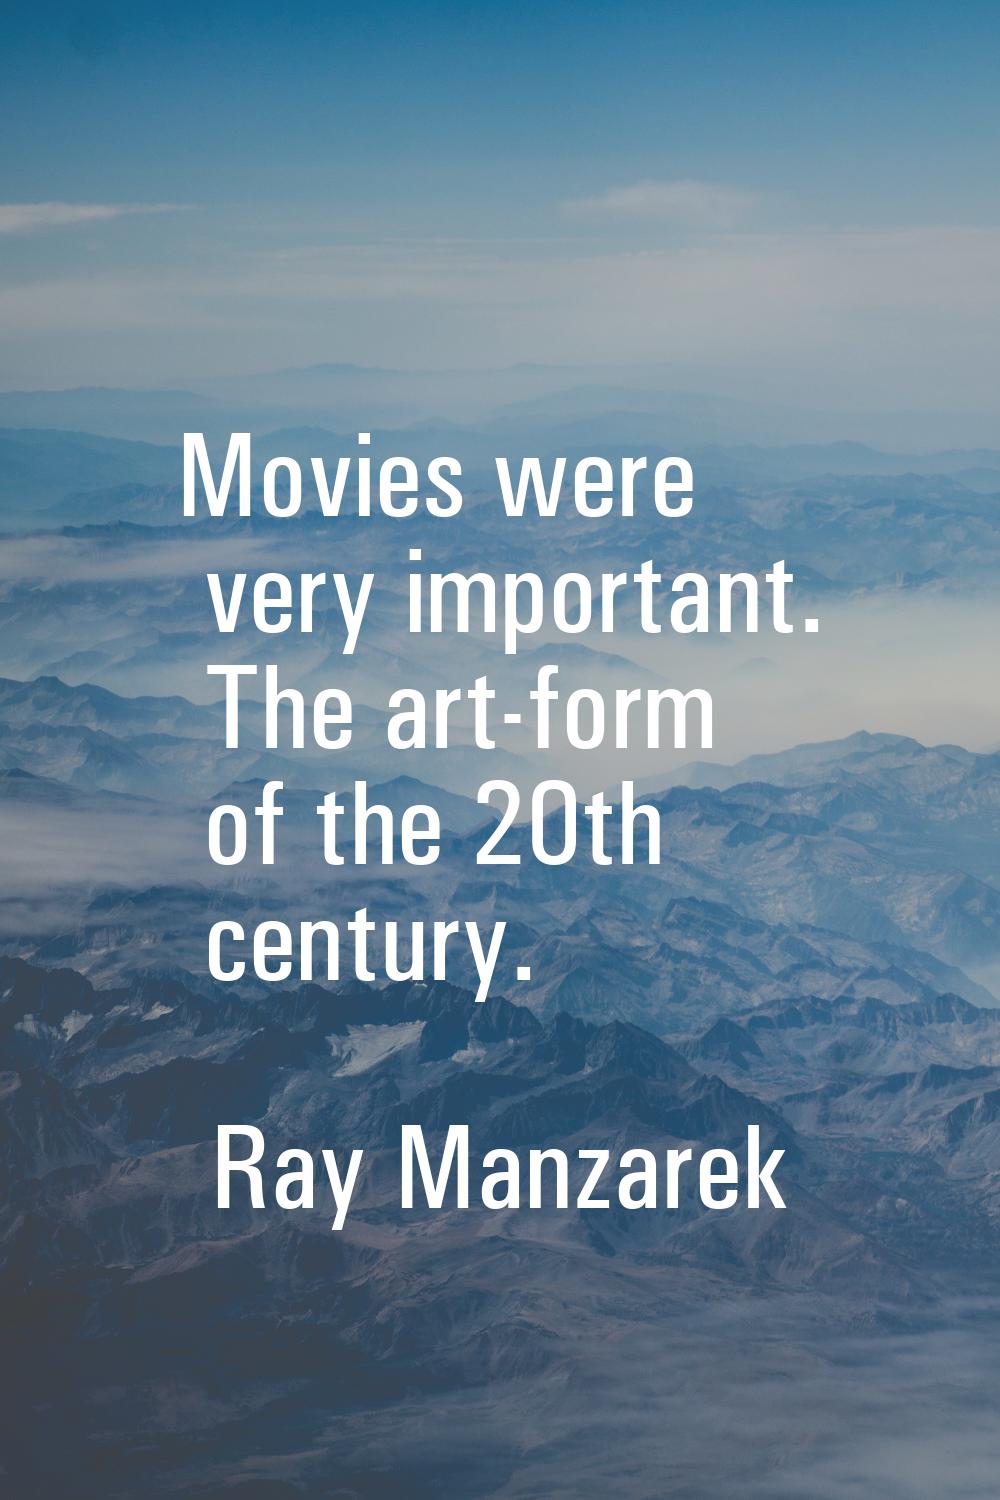 Movies were very important. The art-form of the 20th century.